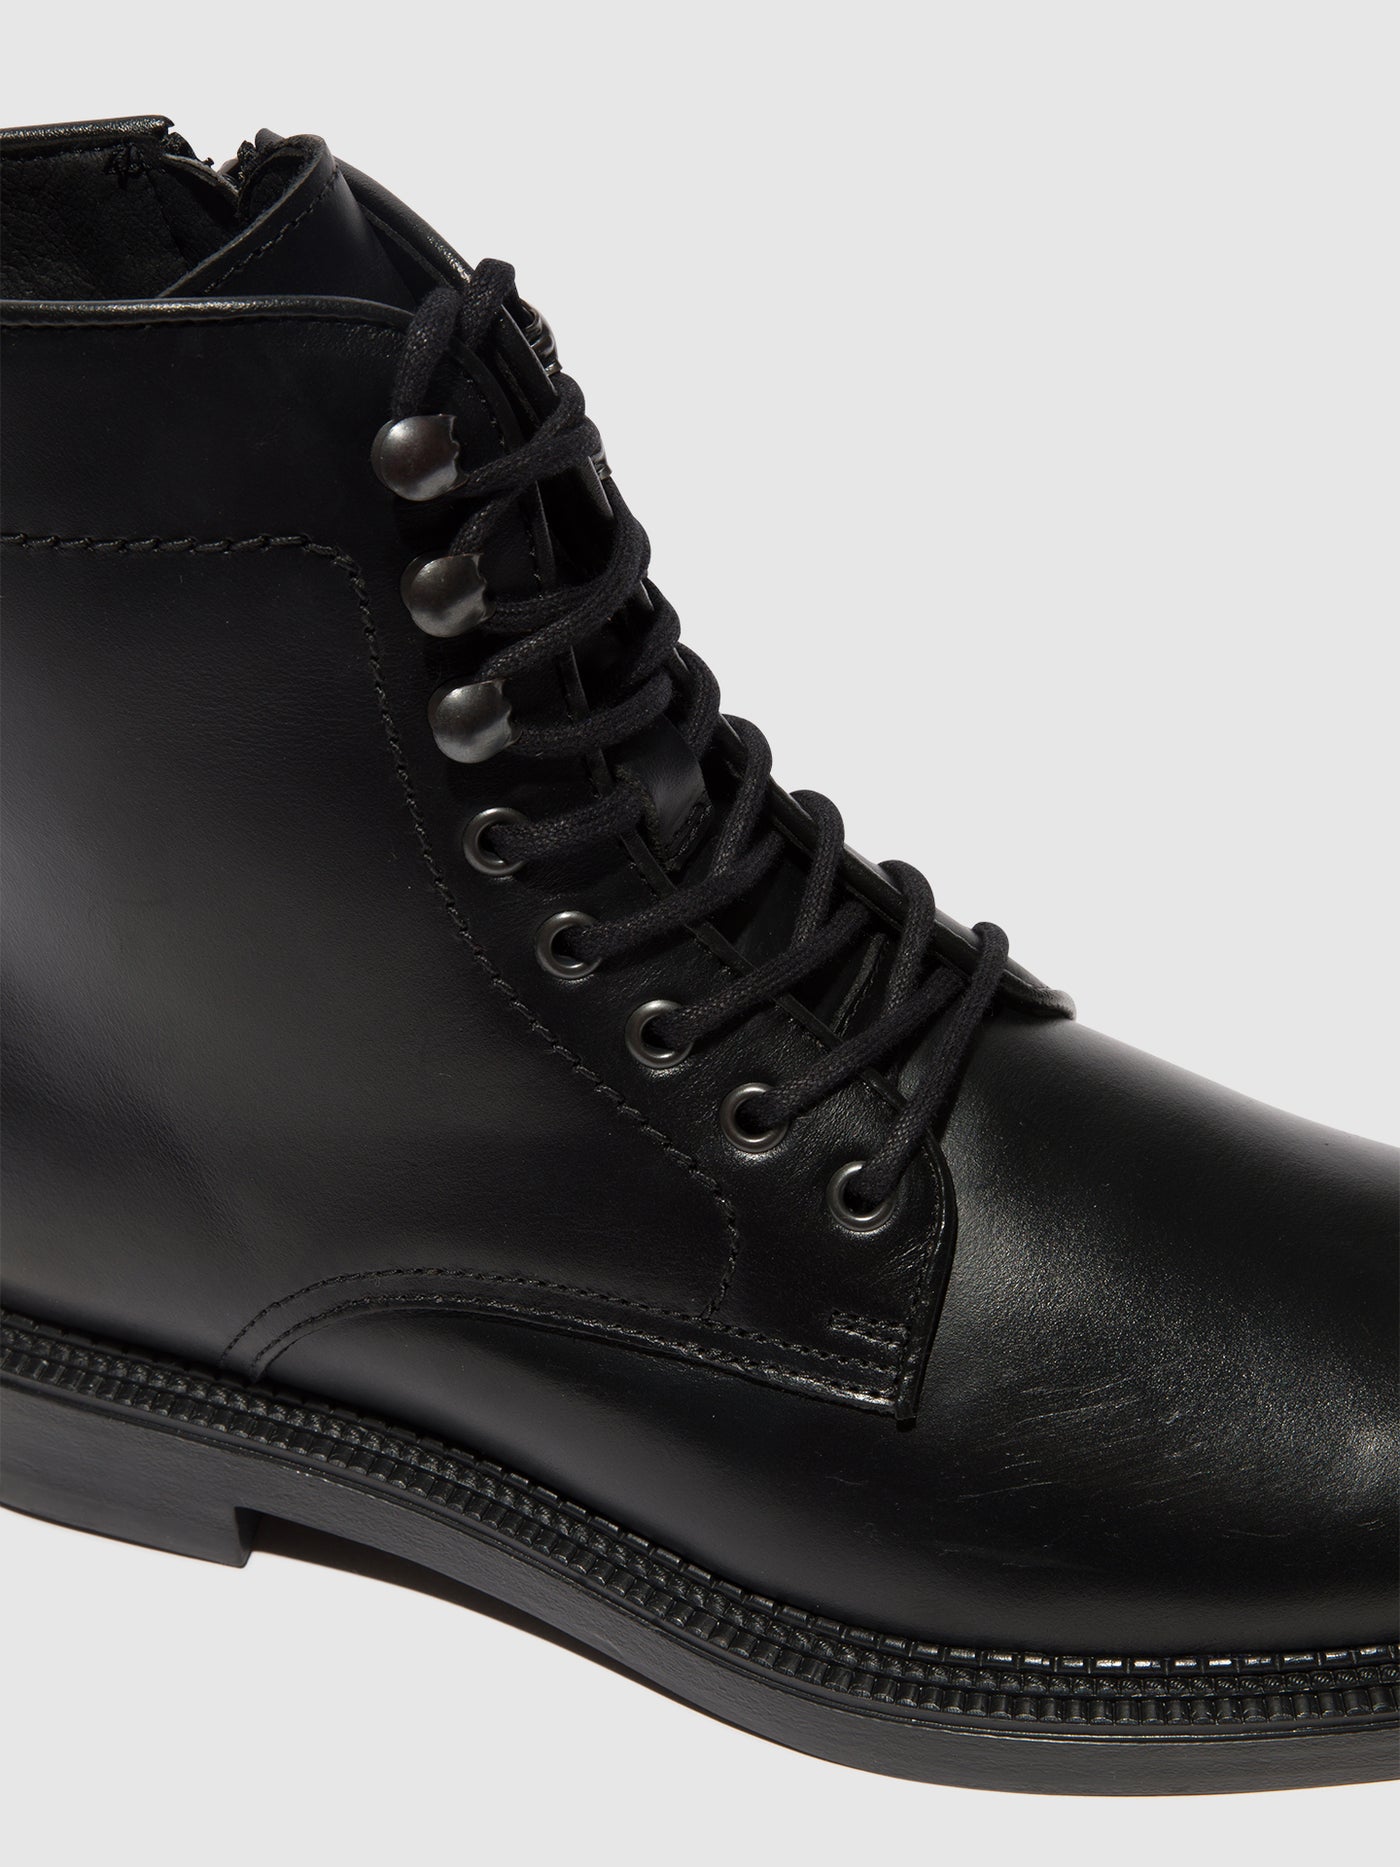 Lace-up Ankle Boots VANO971FLY BLACK